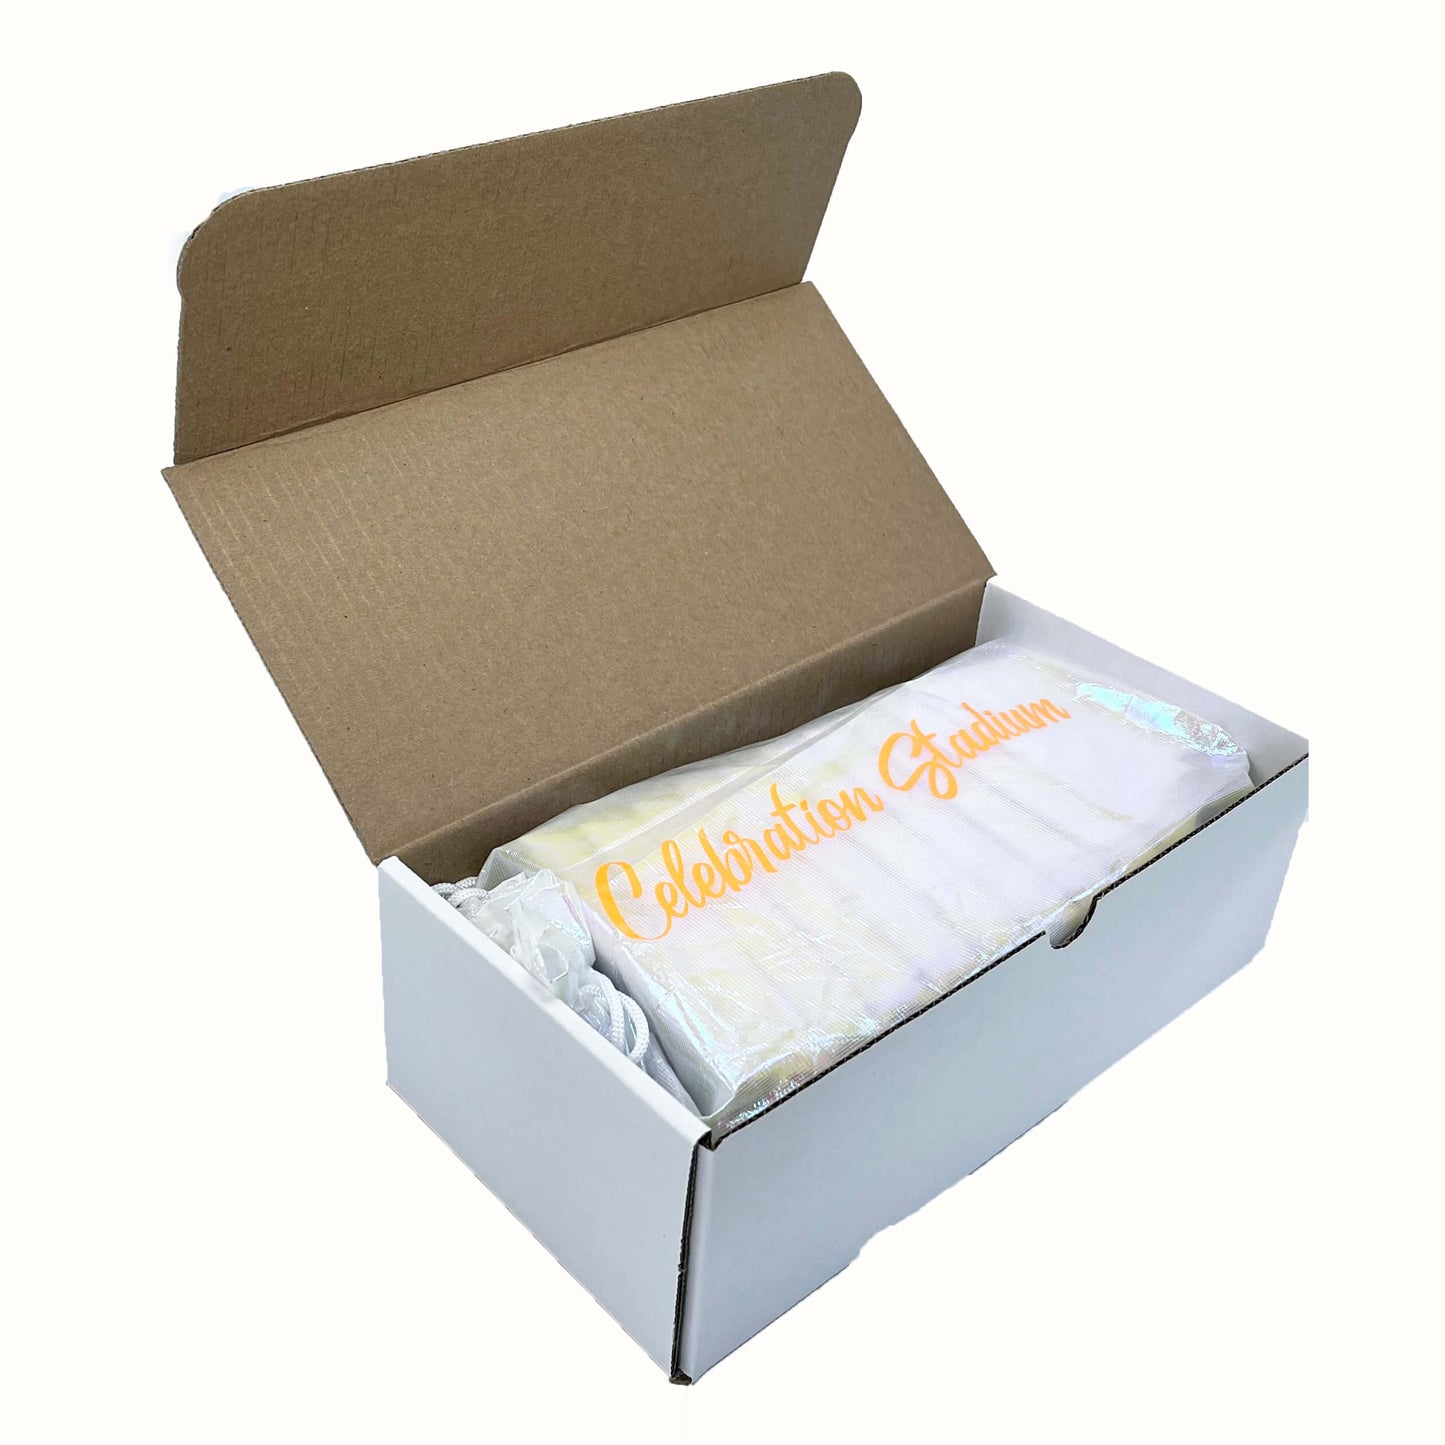 Box containing Birthday Candle Grandstand contents including 100 gold birthday candles